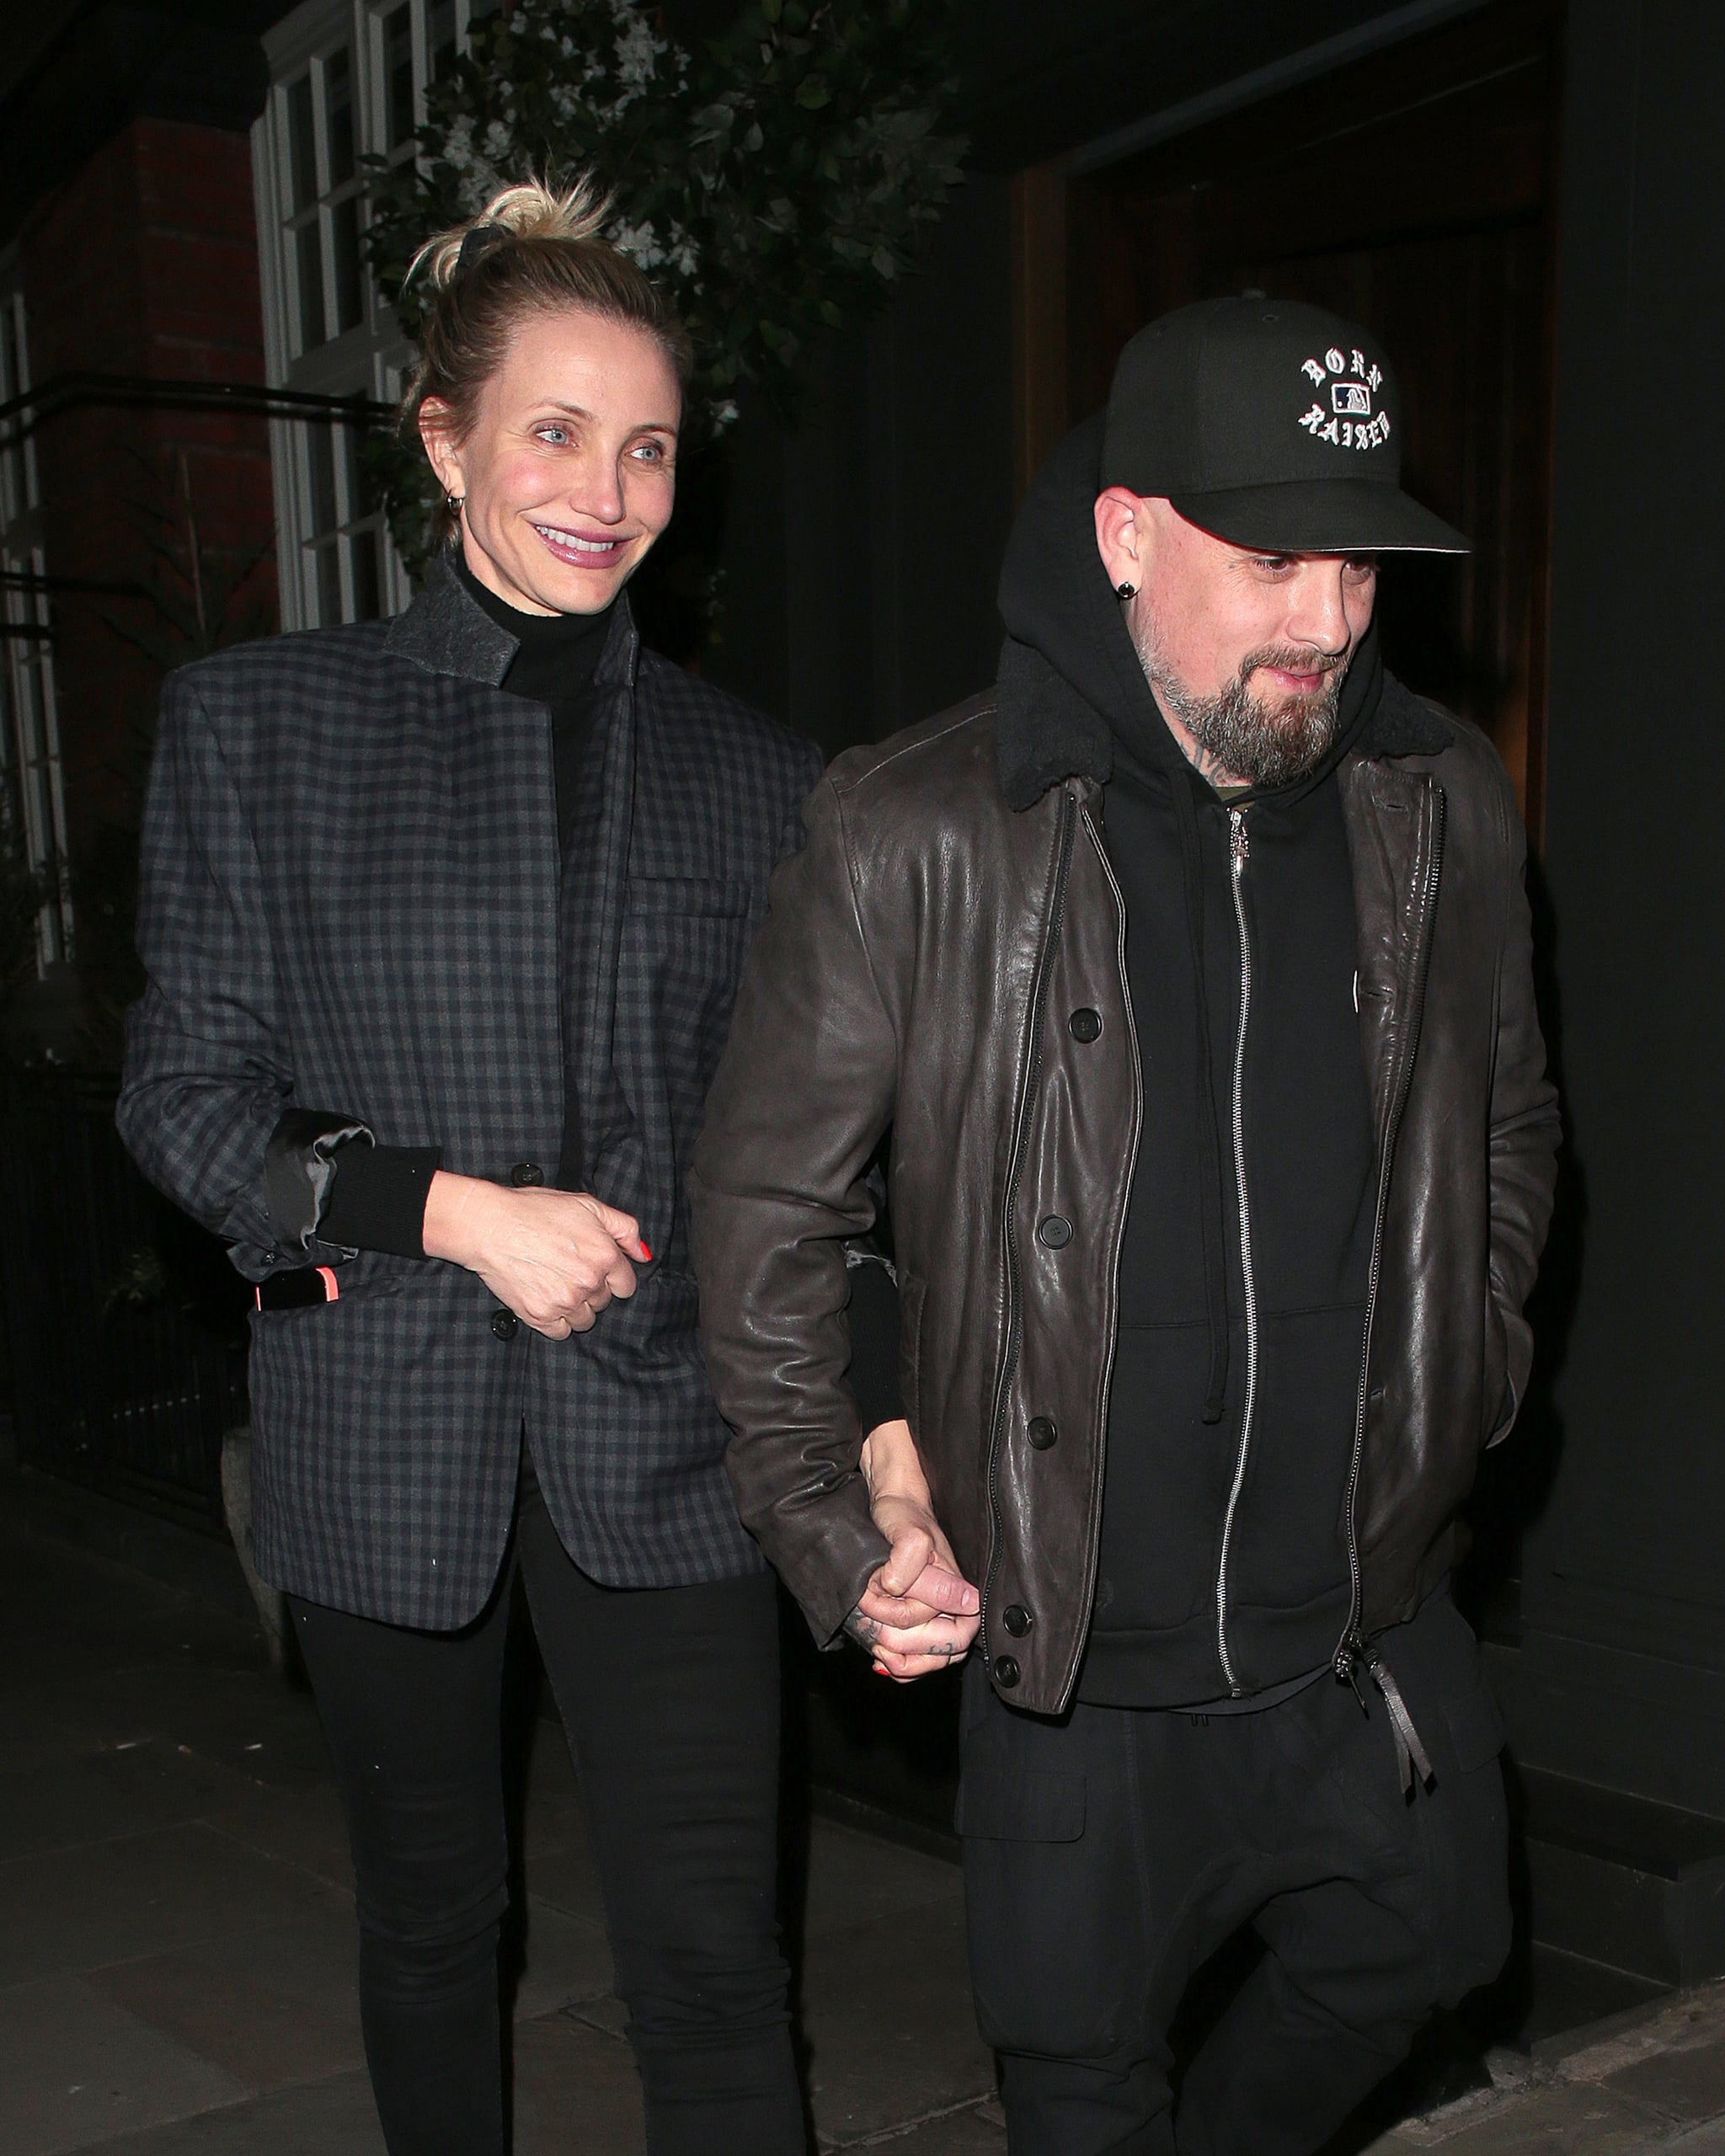 LONDON, ENGLAND - DECEMBER 02:   Cameron Diaz and Benji Madden seen on a night out at Sparrow Italia - Mayfair restaurant on December 02, 2022 in London, England. (Photo by Ricky Vigil M/GC Images